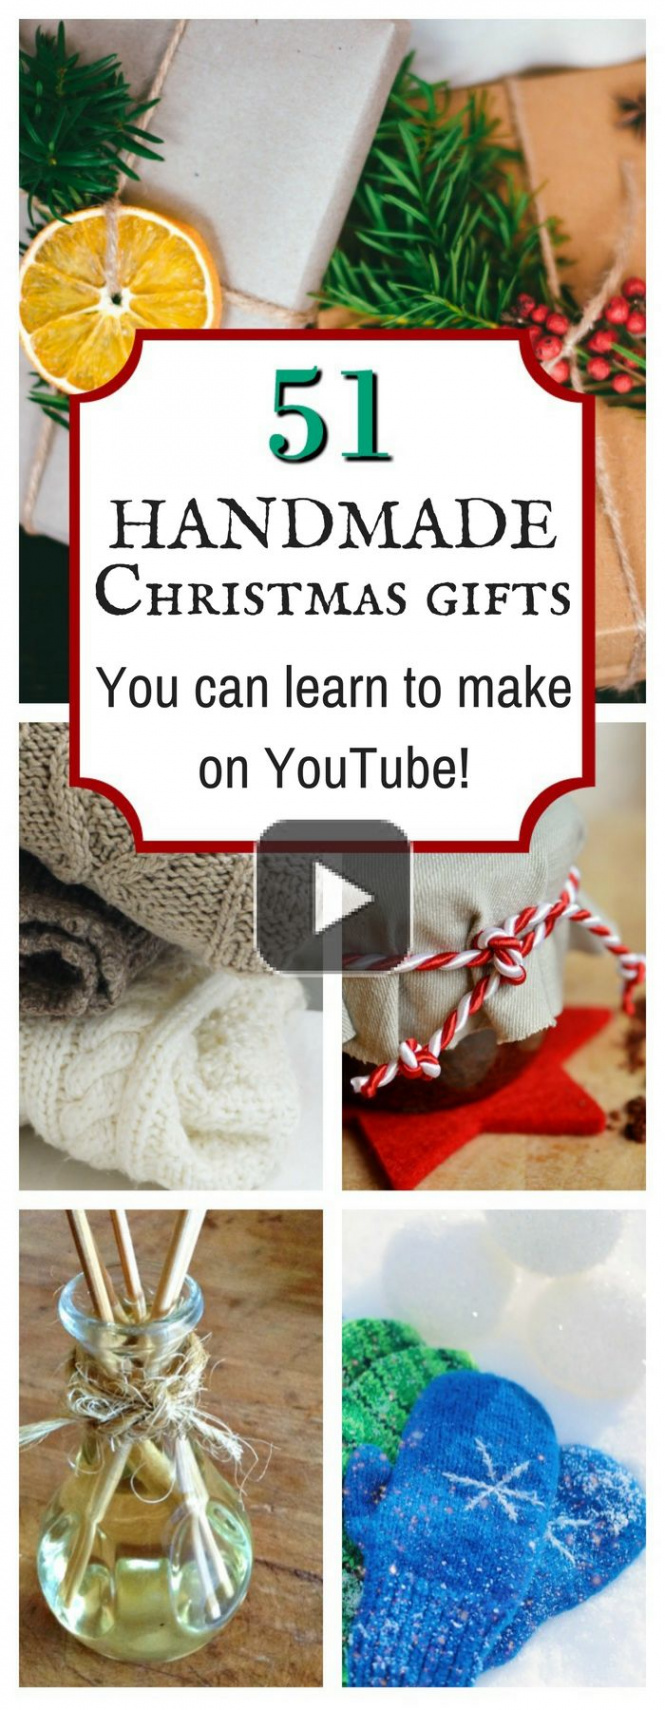 Handmade Christmas Gifts (you can learn to make on YouTube!) in